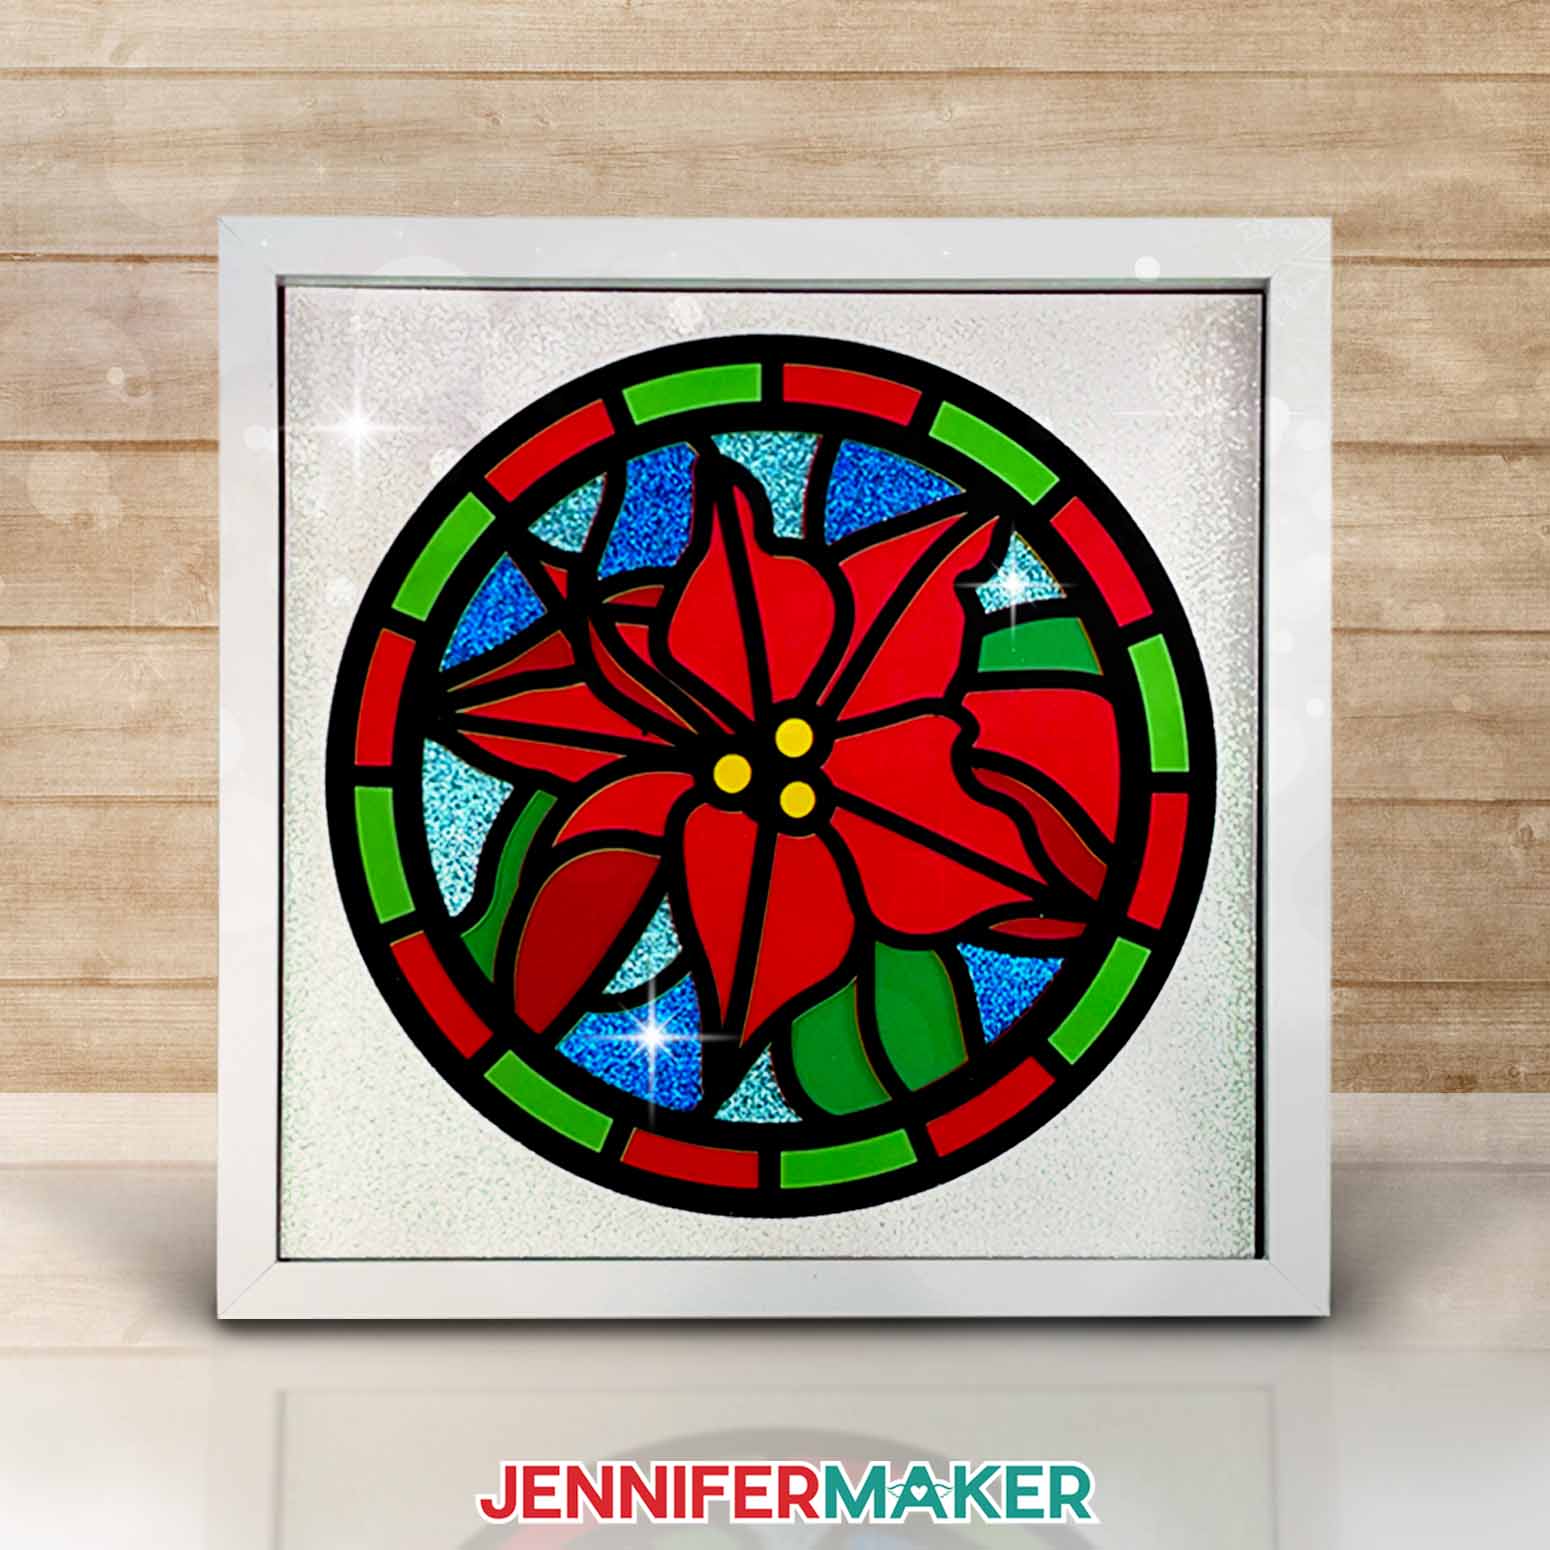 The completed and framed Poinsettia design.